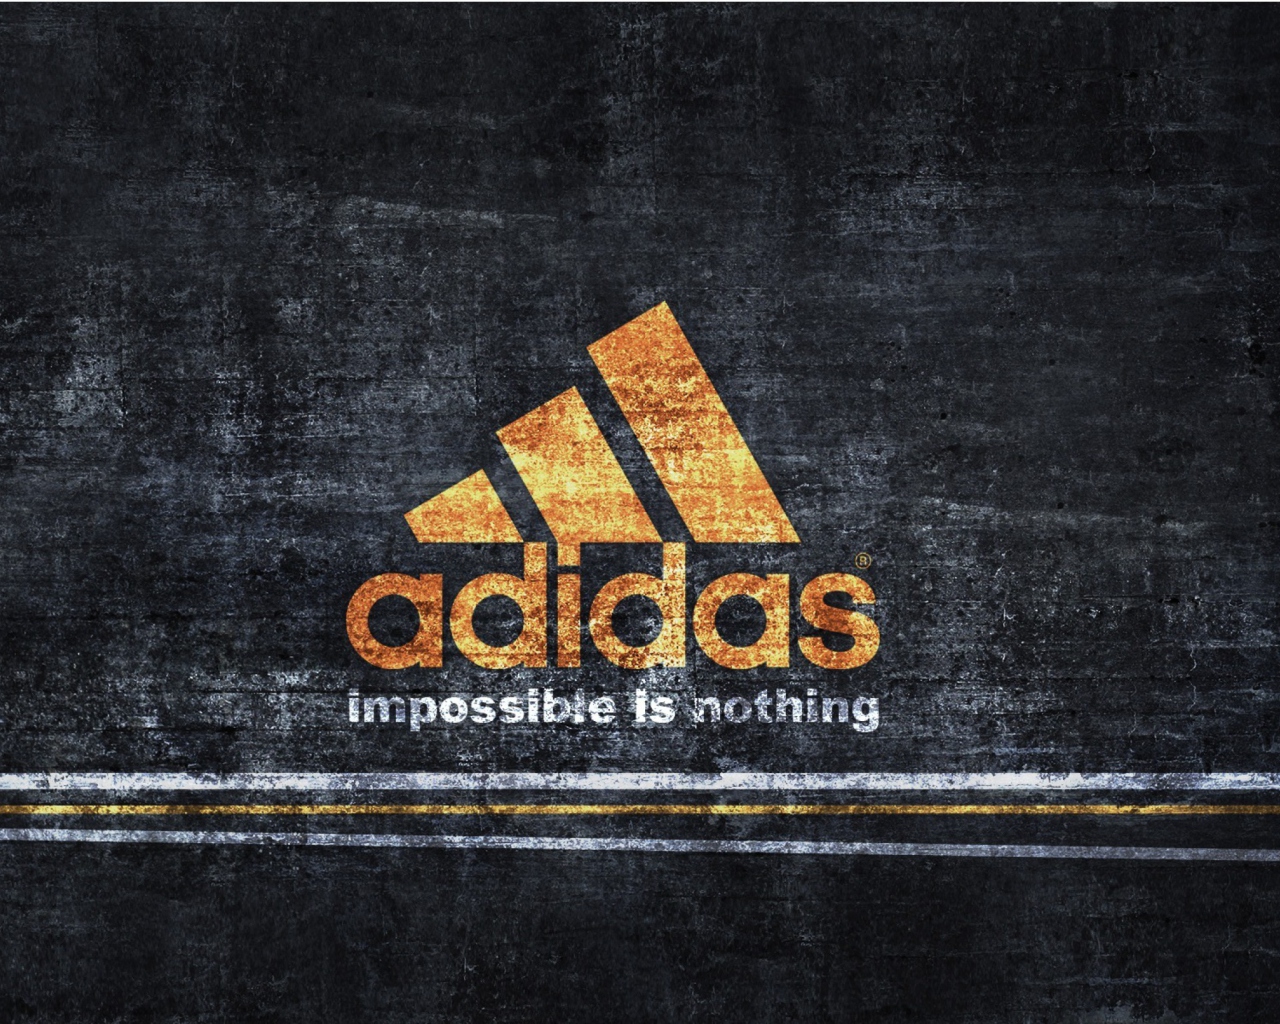 Das Adidas – Impossible is Nothing Wallpaper 1280x1024